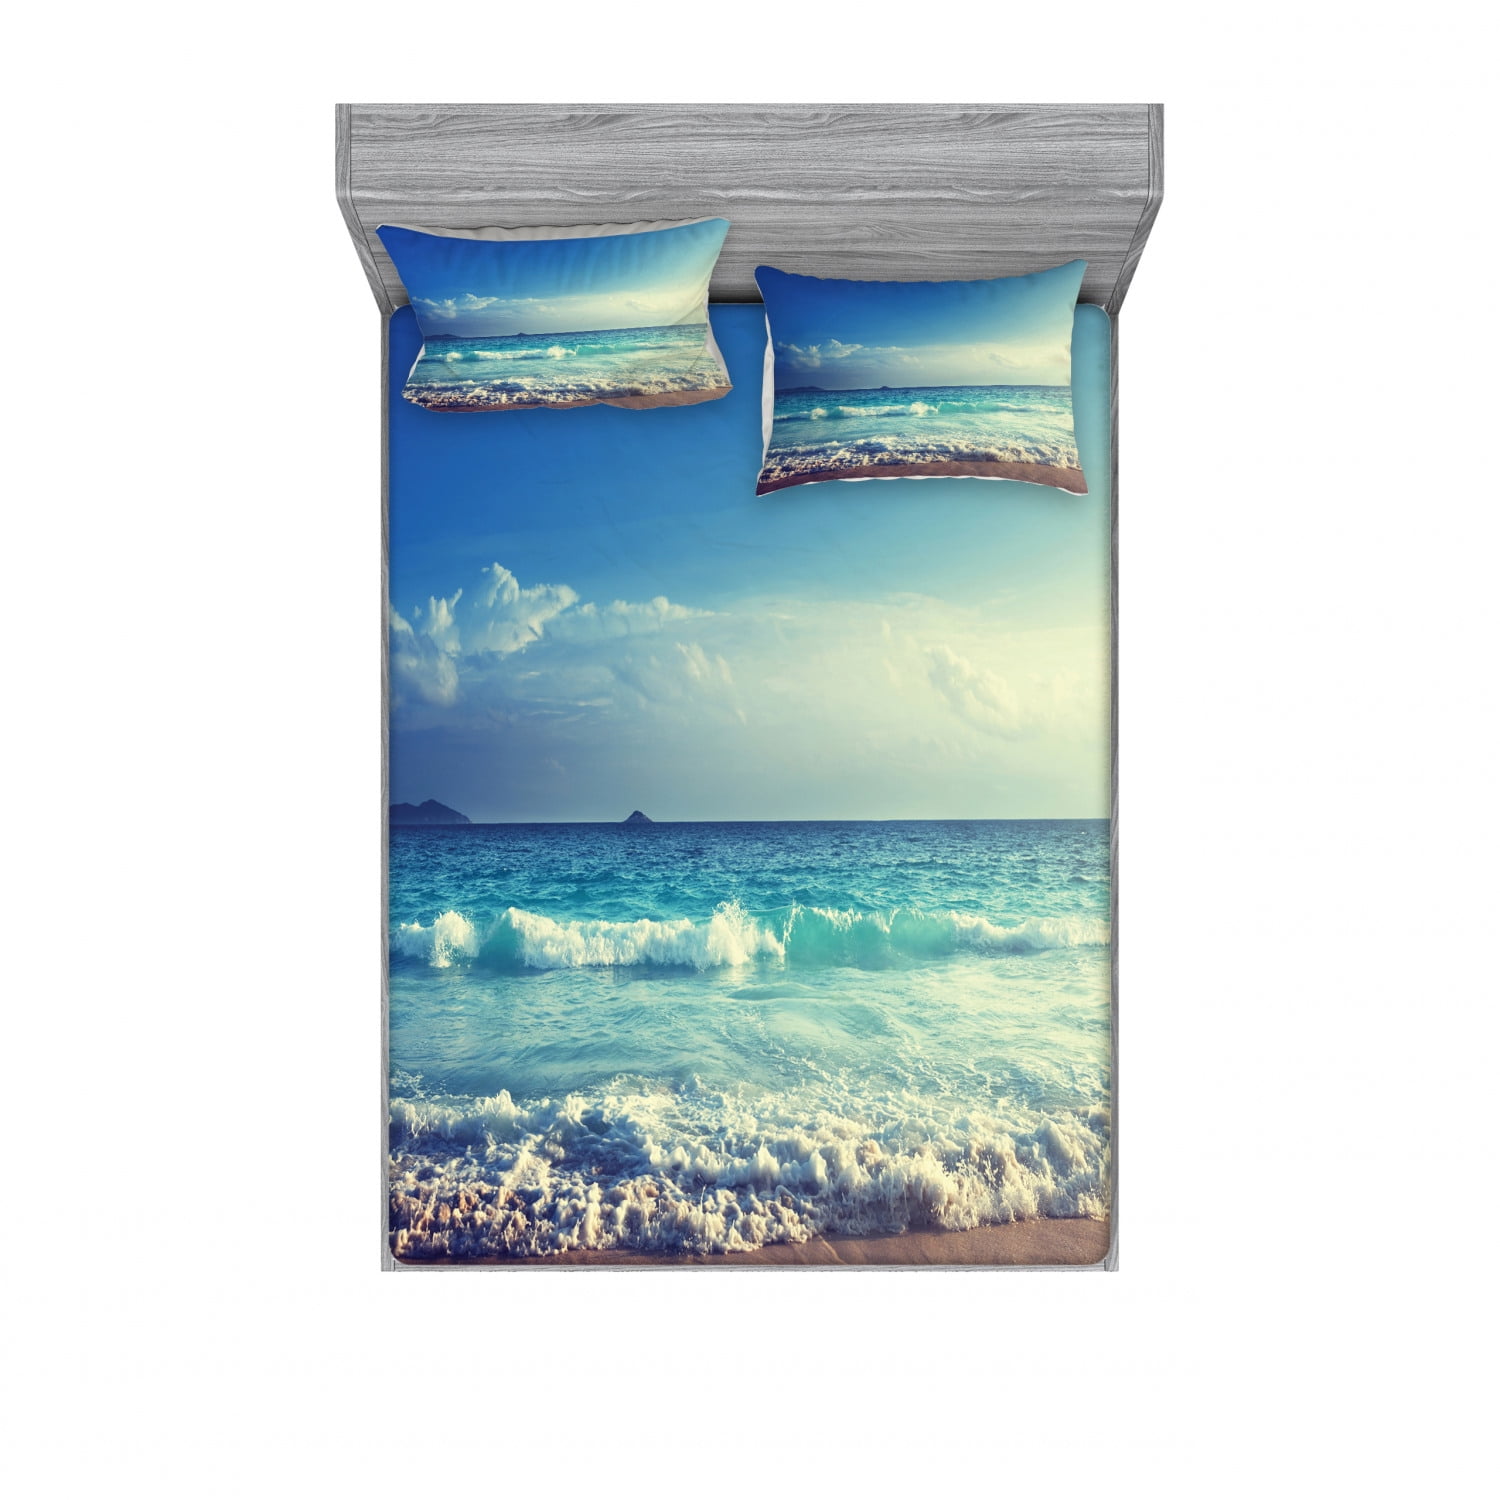 Soft Decorative Fabric Bedding All-Round Elastic Pocket Tropical Island Paradise Beach at Sunset Time with Waves and The Misty Sea Image Turquoise Cream Ambesonne Ocean Fitted Sheet Queen Size